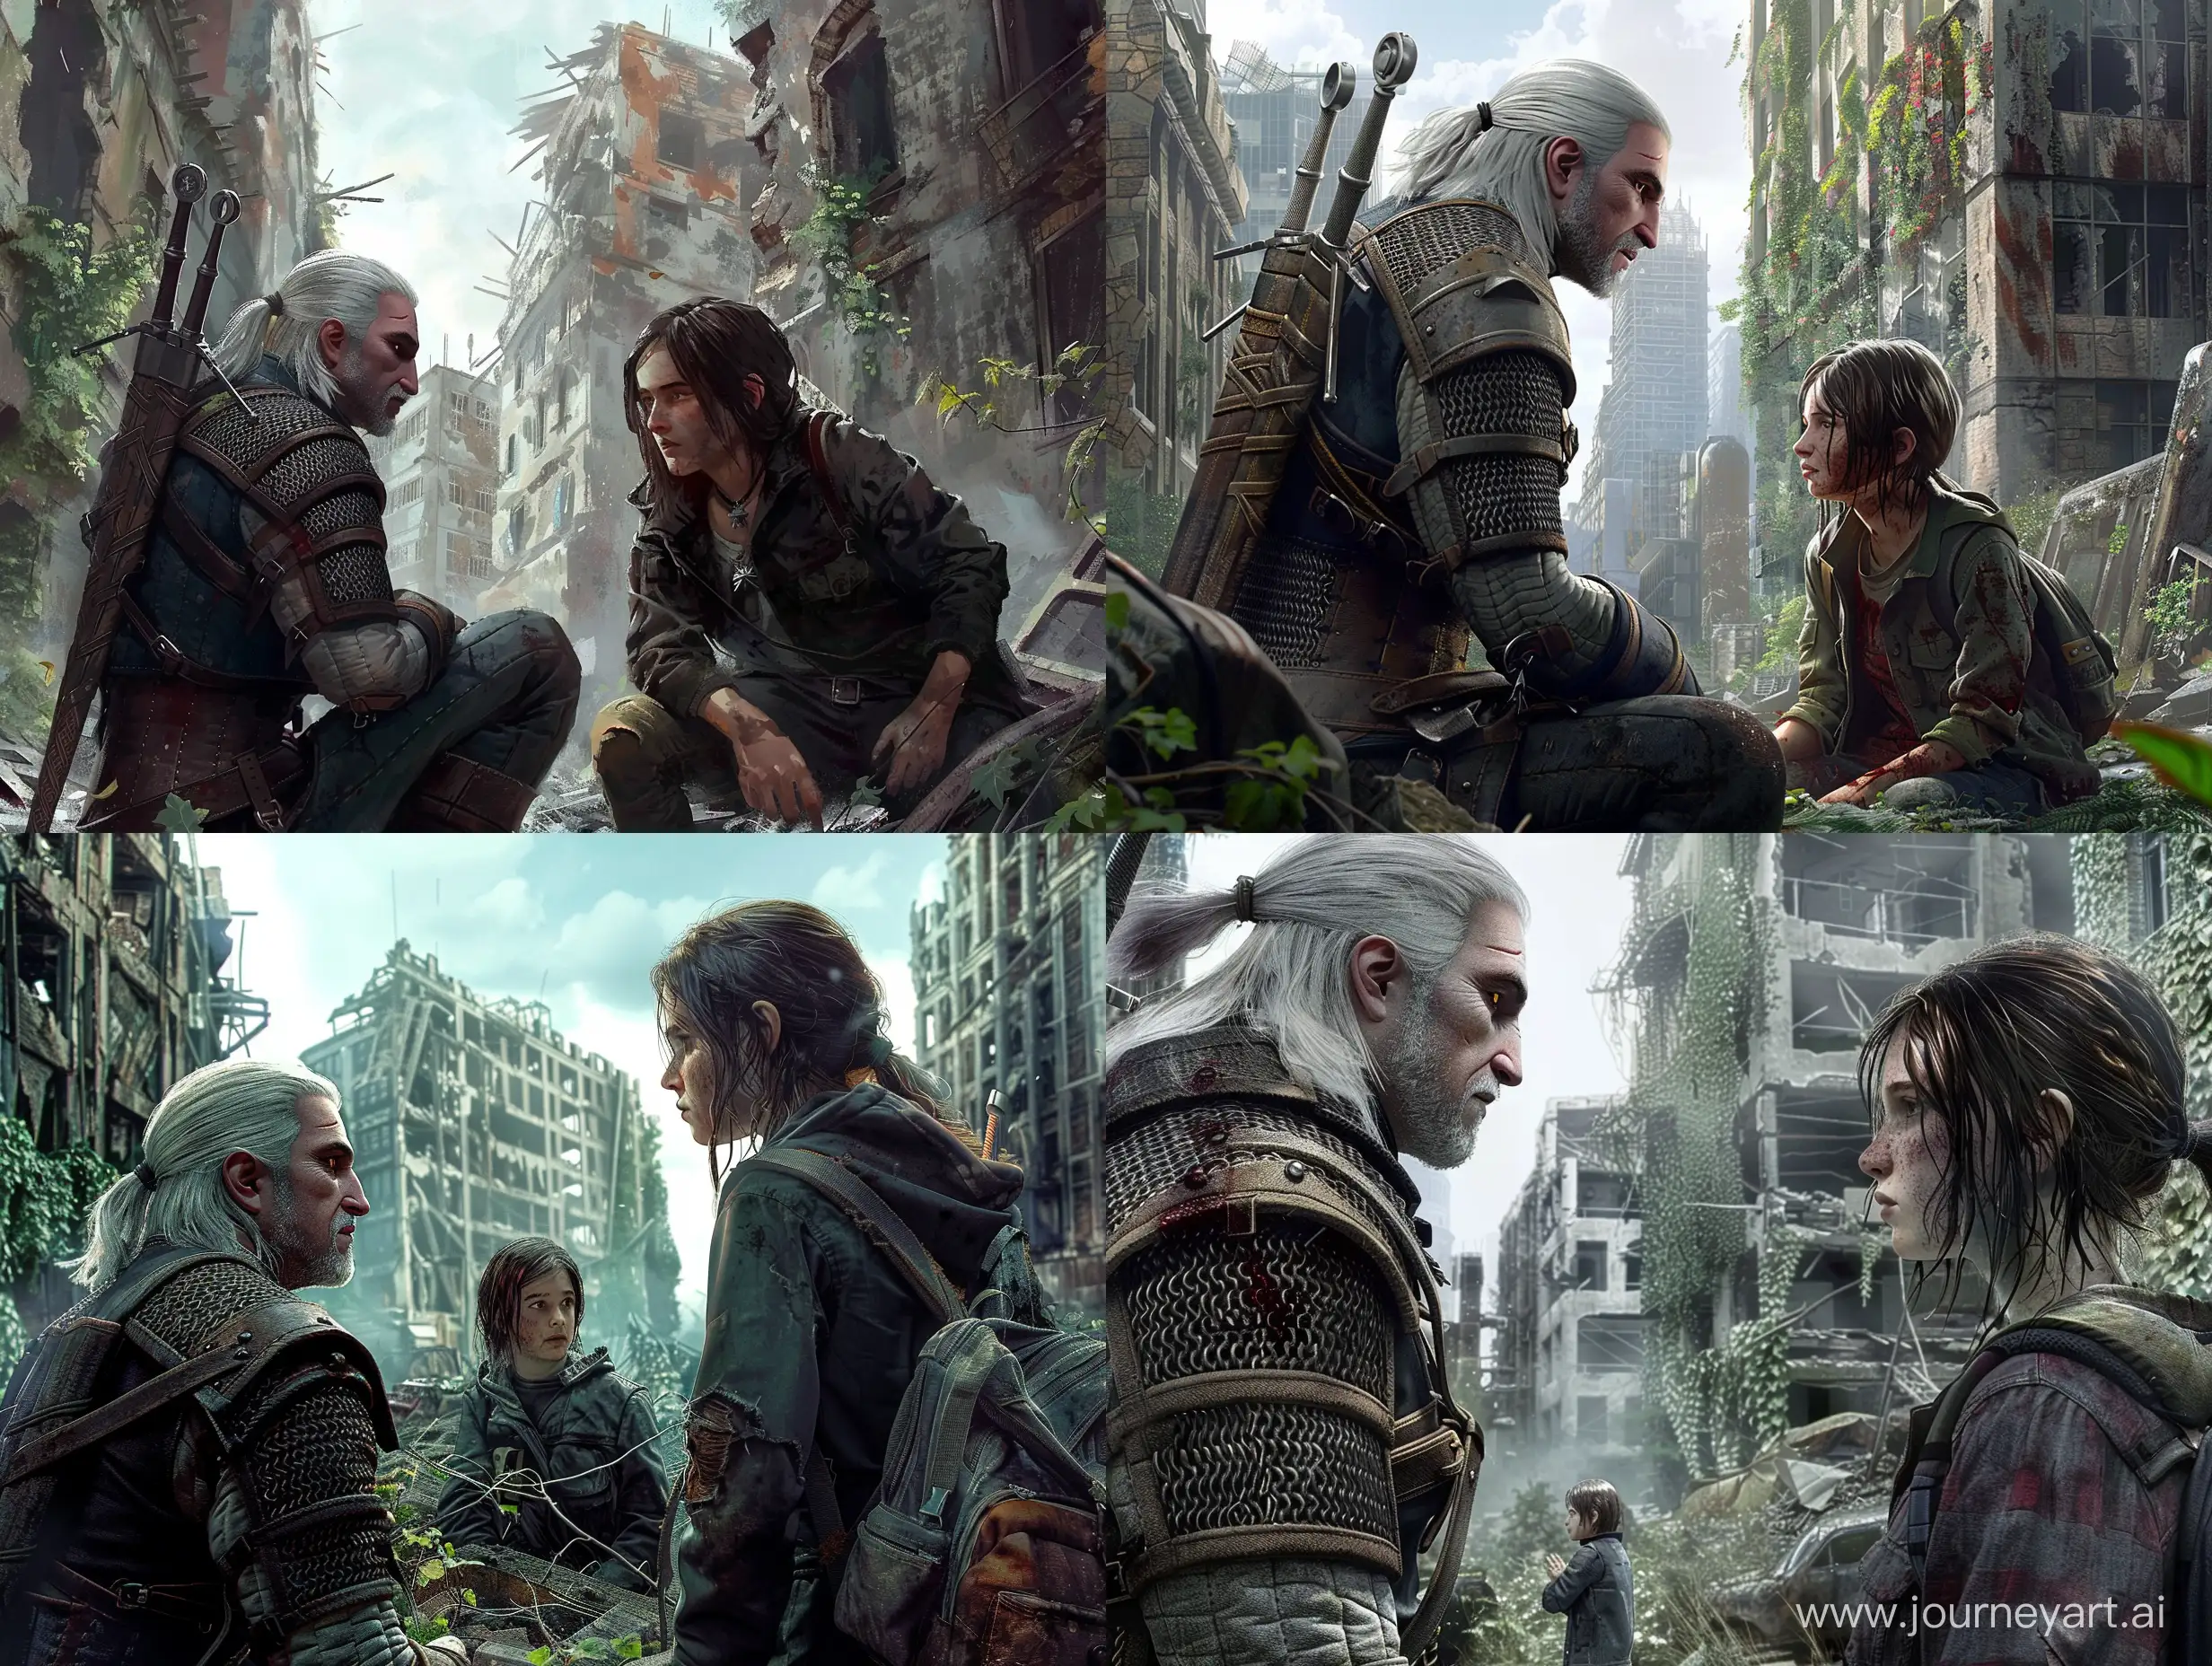 Geralt of Rivia from the game The Witcher 3, Joel and Ellie and the game The Last of us, meeting in a post-apocalyptic city, ruins, vines, cinematic